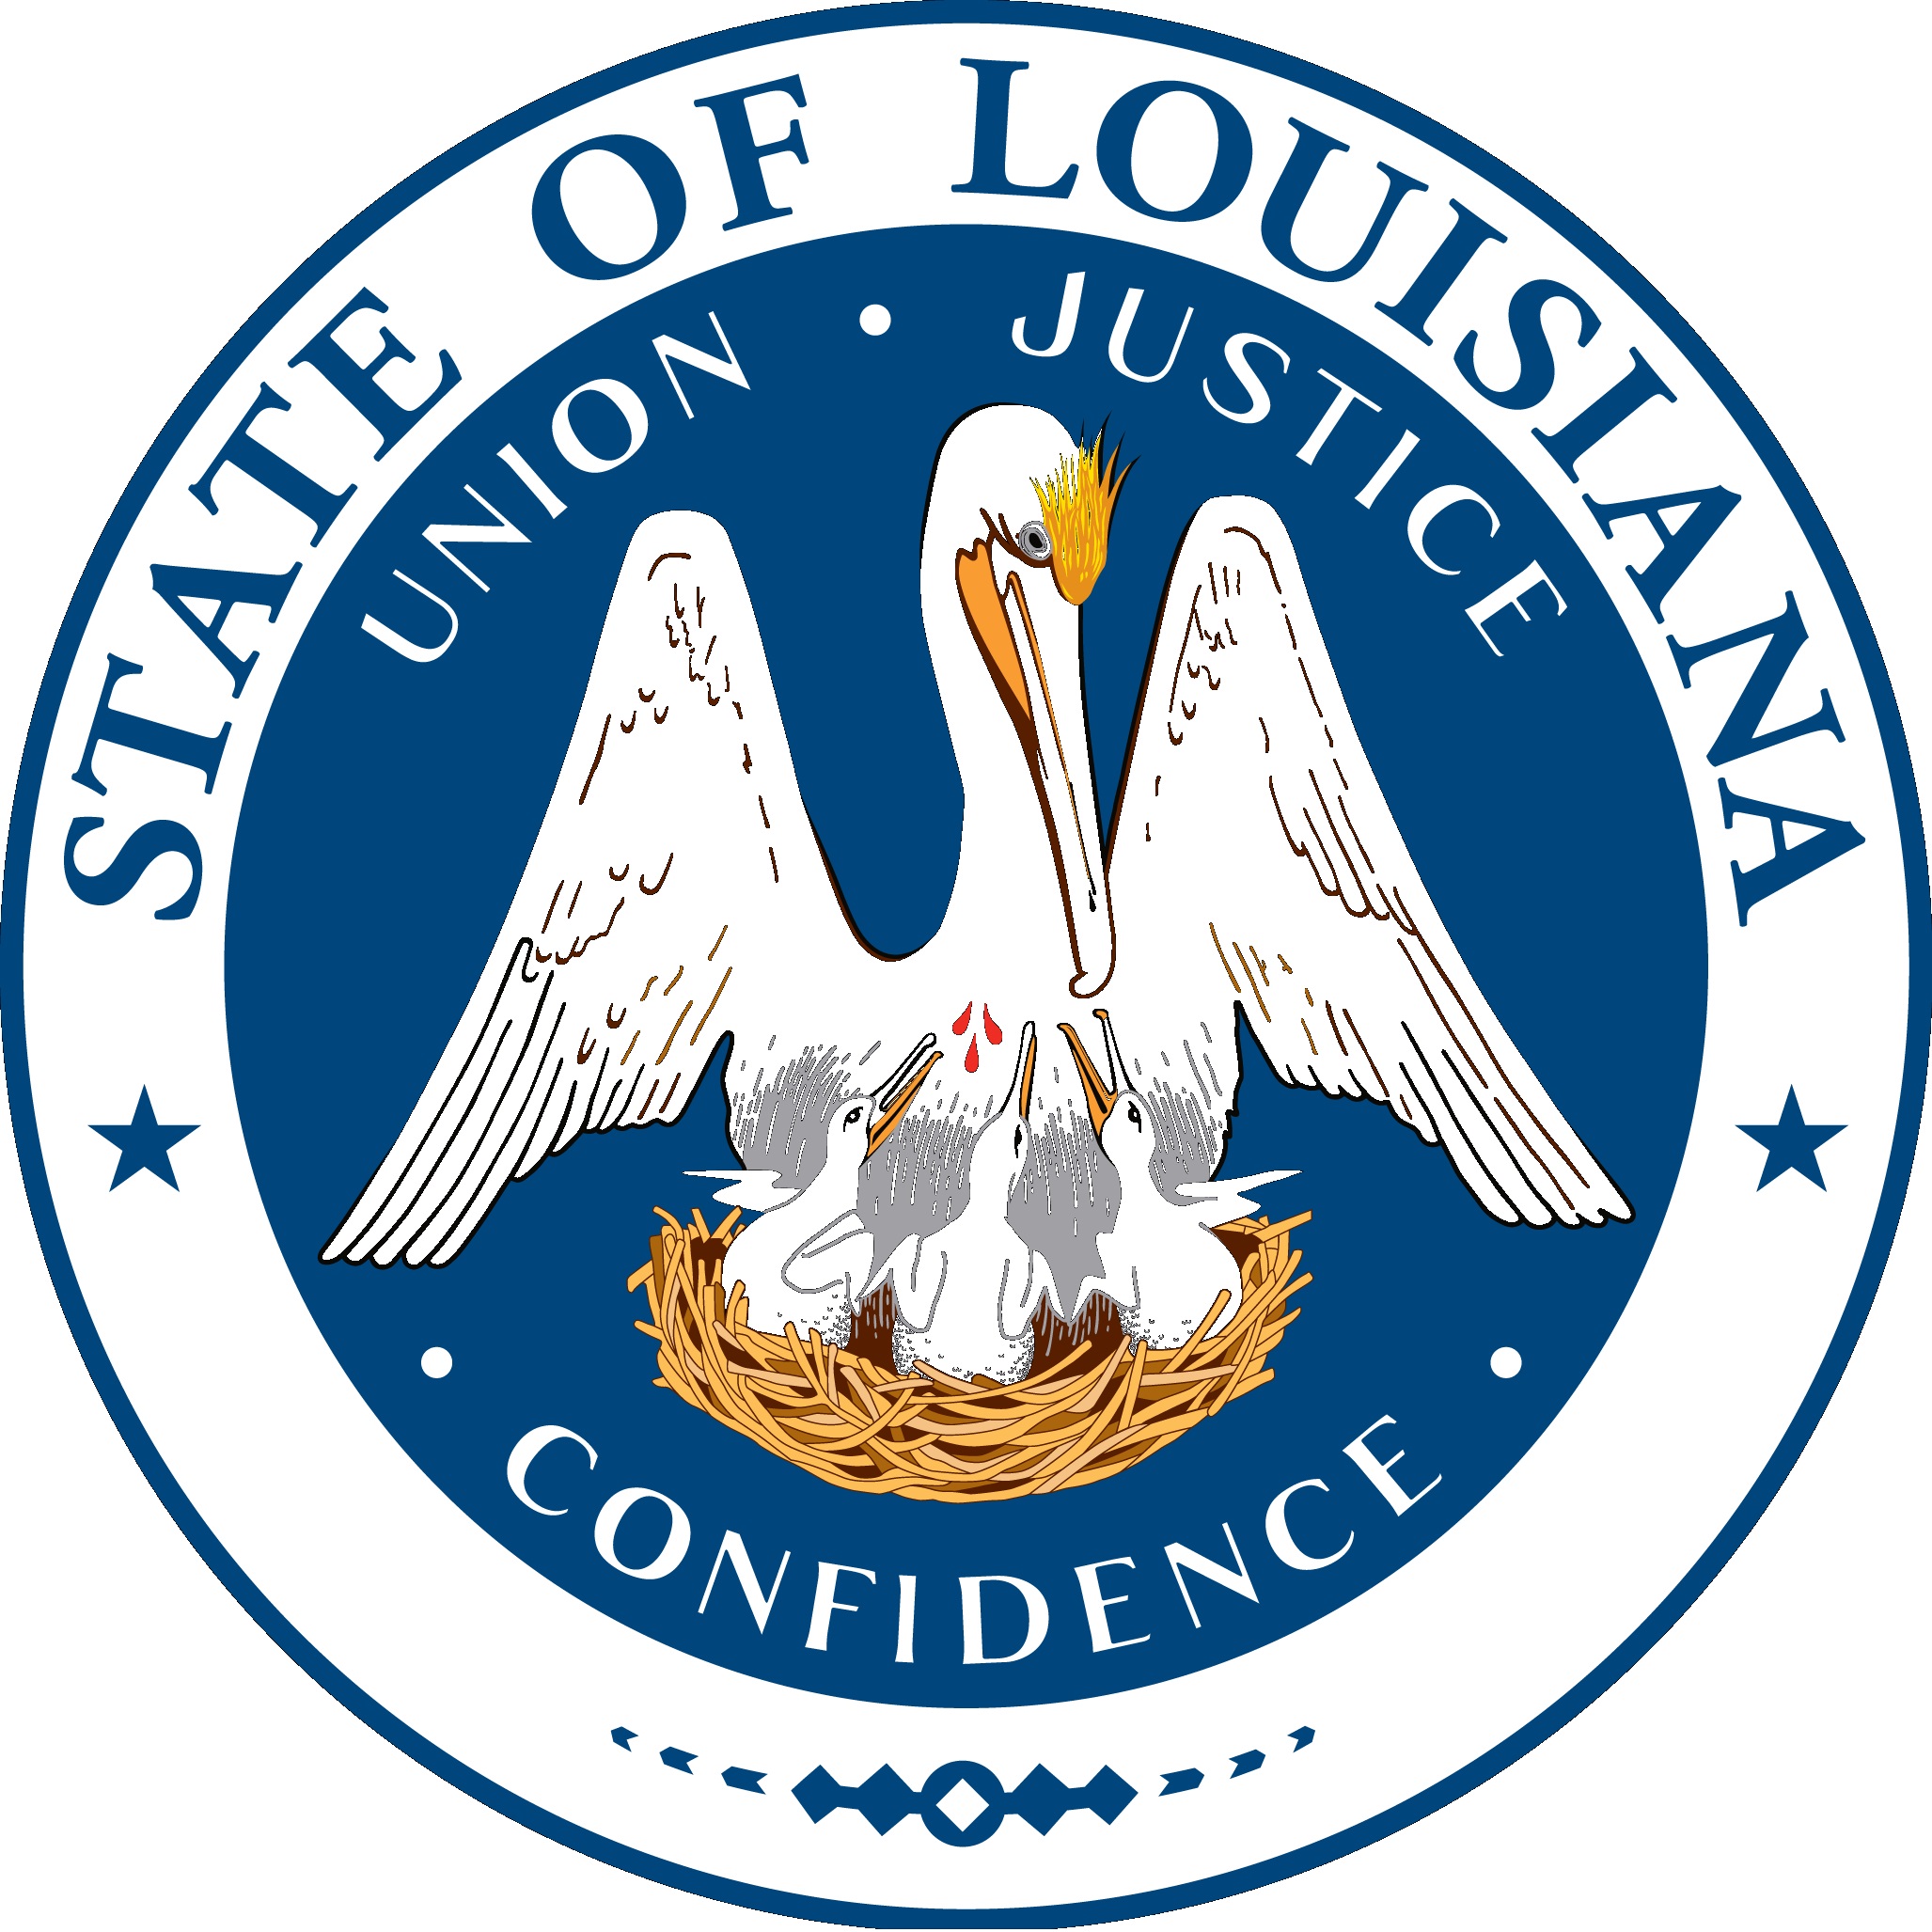 louisiana state flag coloring page